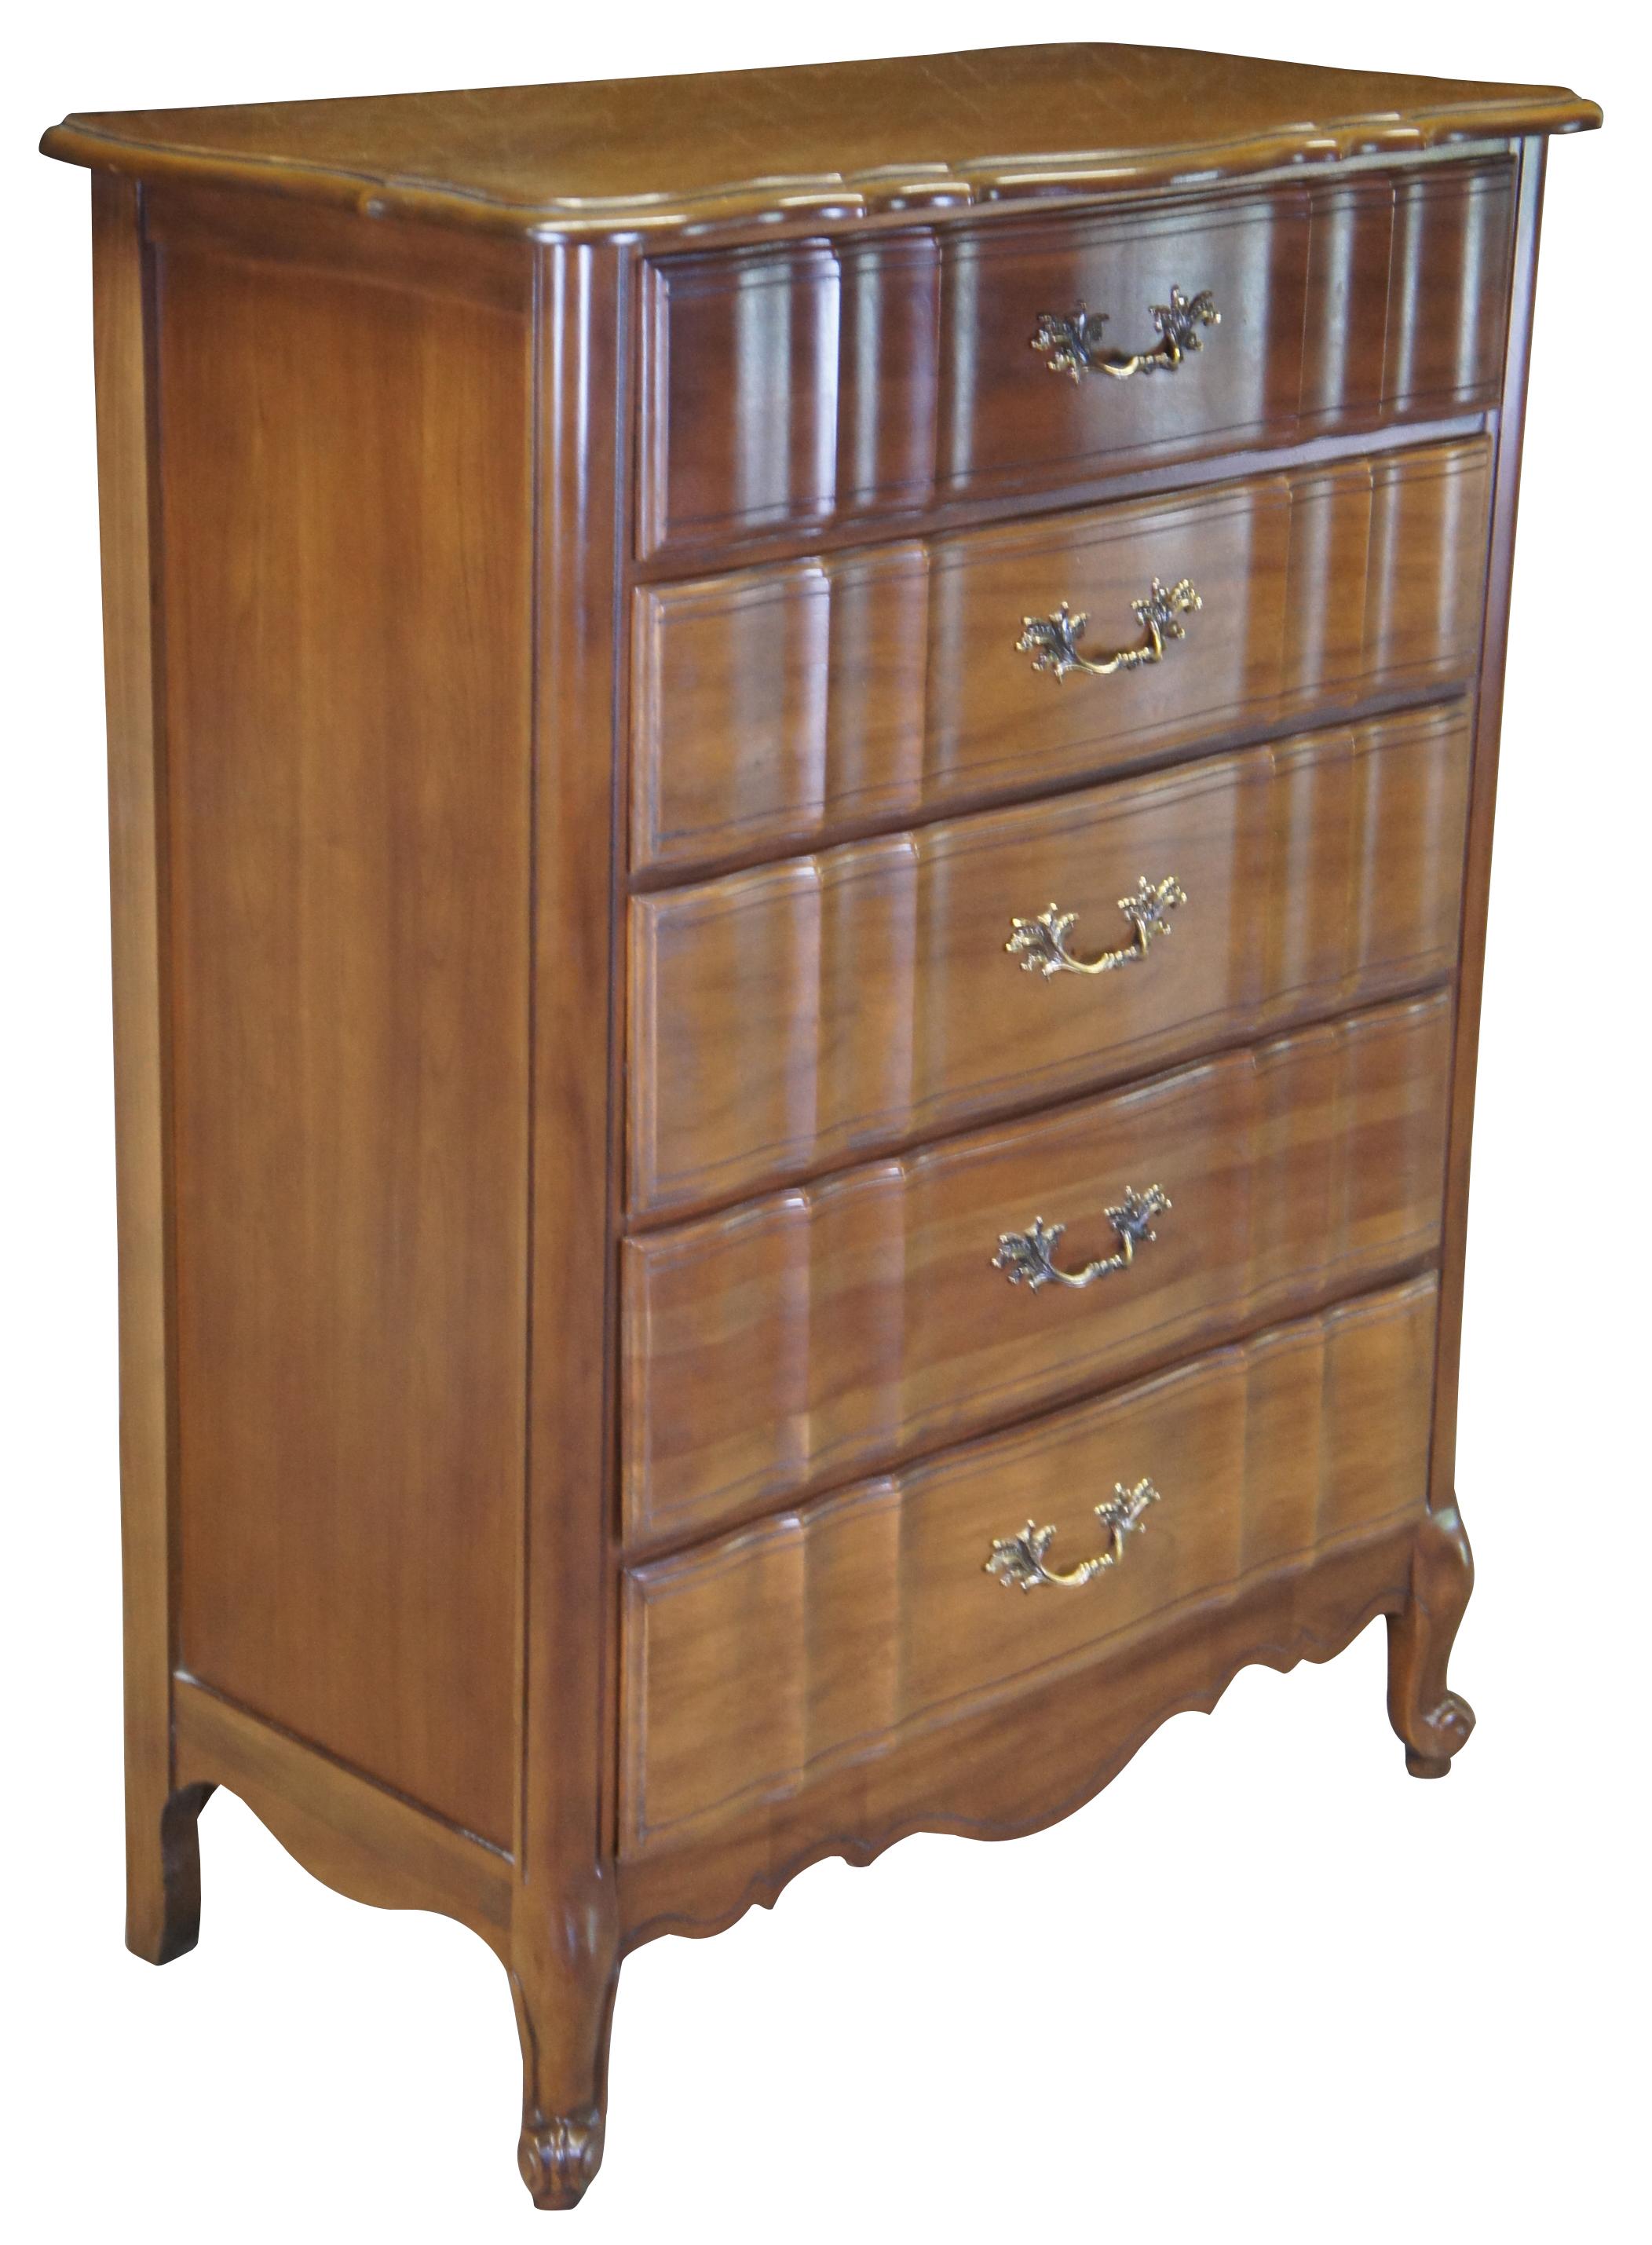 Vintage fruitwood chest or dresser by Kent Coffey. From the Marqee French collection, featuring French Provincial styling with scalloped / serpentine top over five drawers and scrolled cabriole feet. 300-140.
  